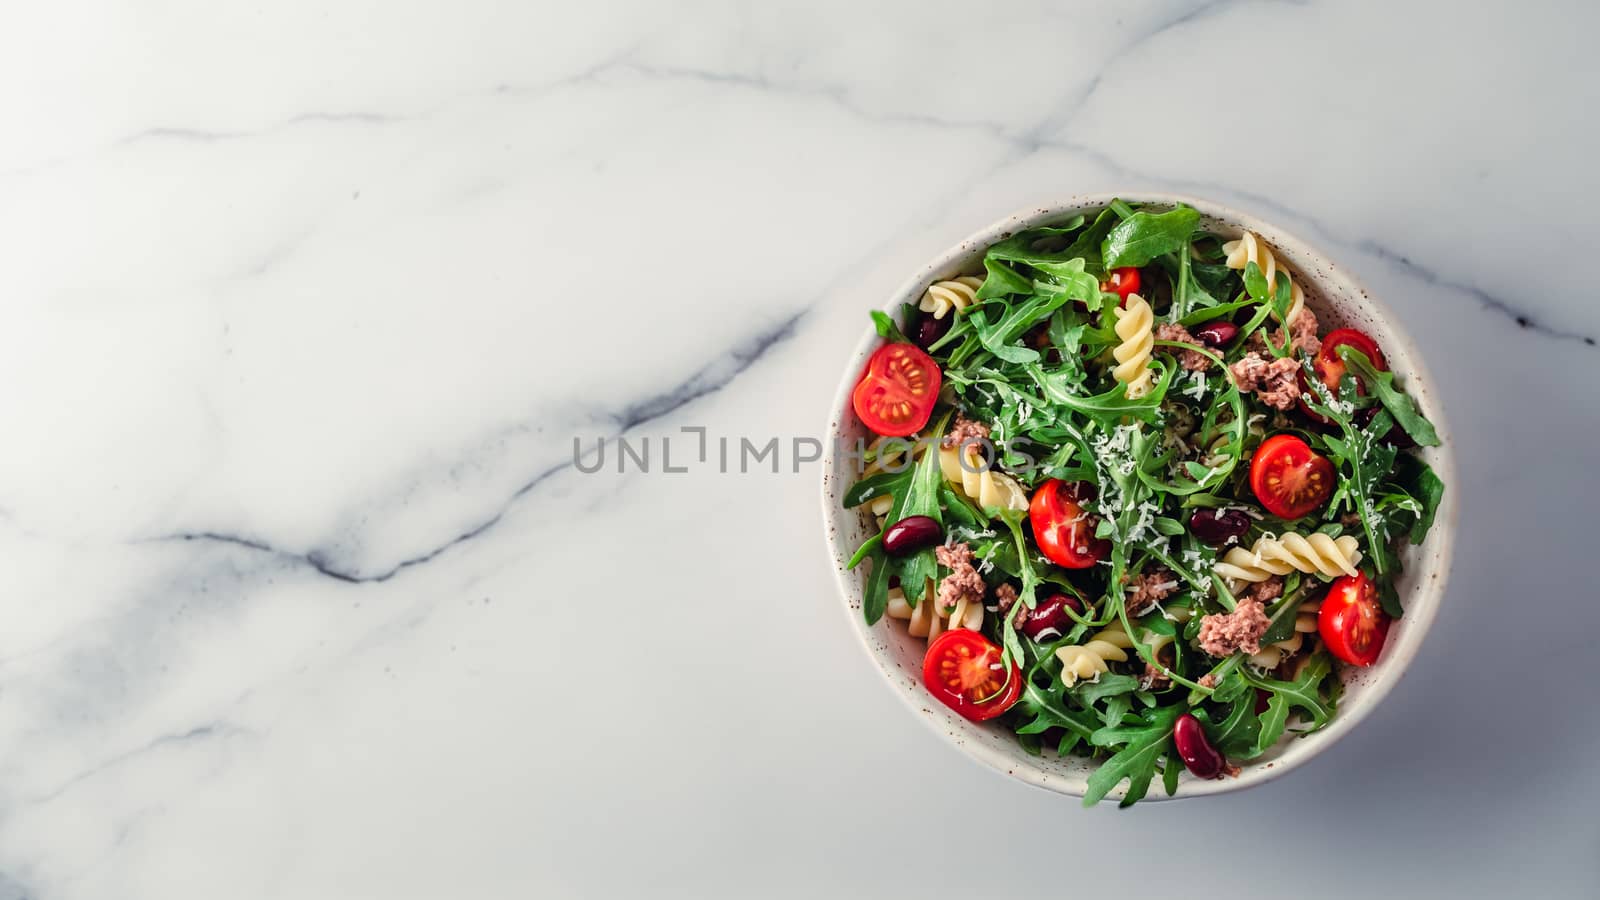 Warm salad with tuna, arugula, tomatoes, red bean, pasta. Idea and recipe for healthy lunch or dinner. Bowl with warm salads on marble tabletop. Healthy dinner. Top view. Copy space for text. Banner